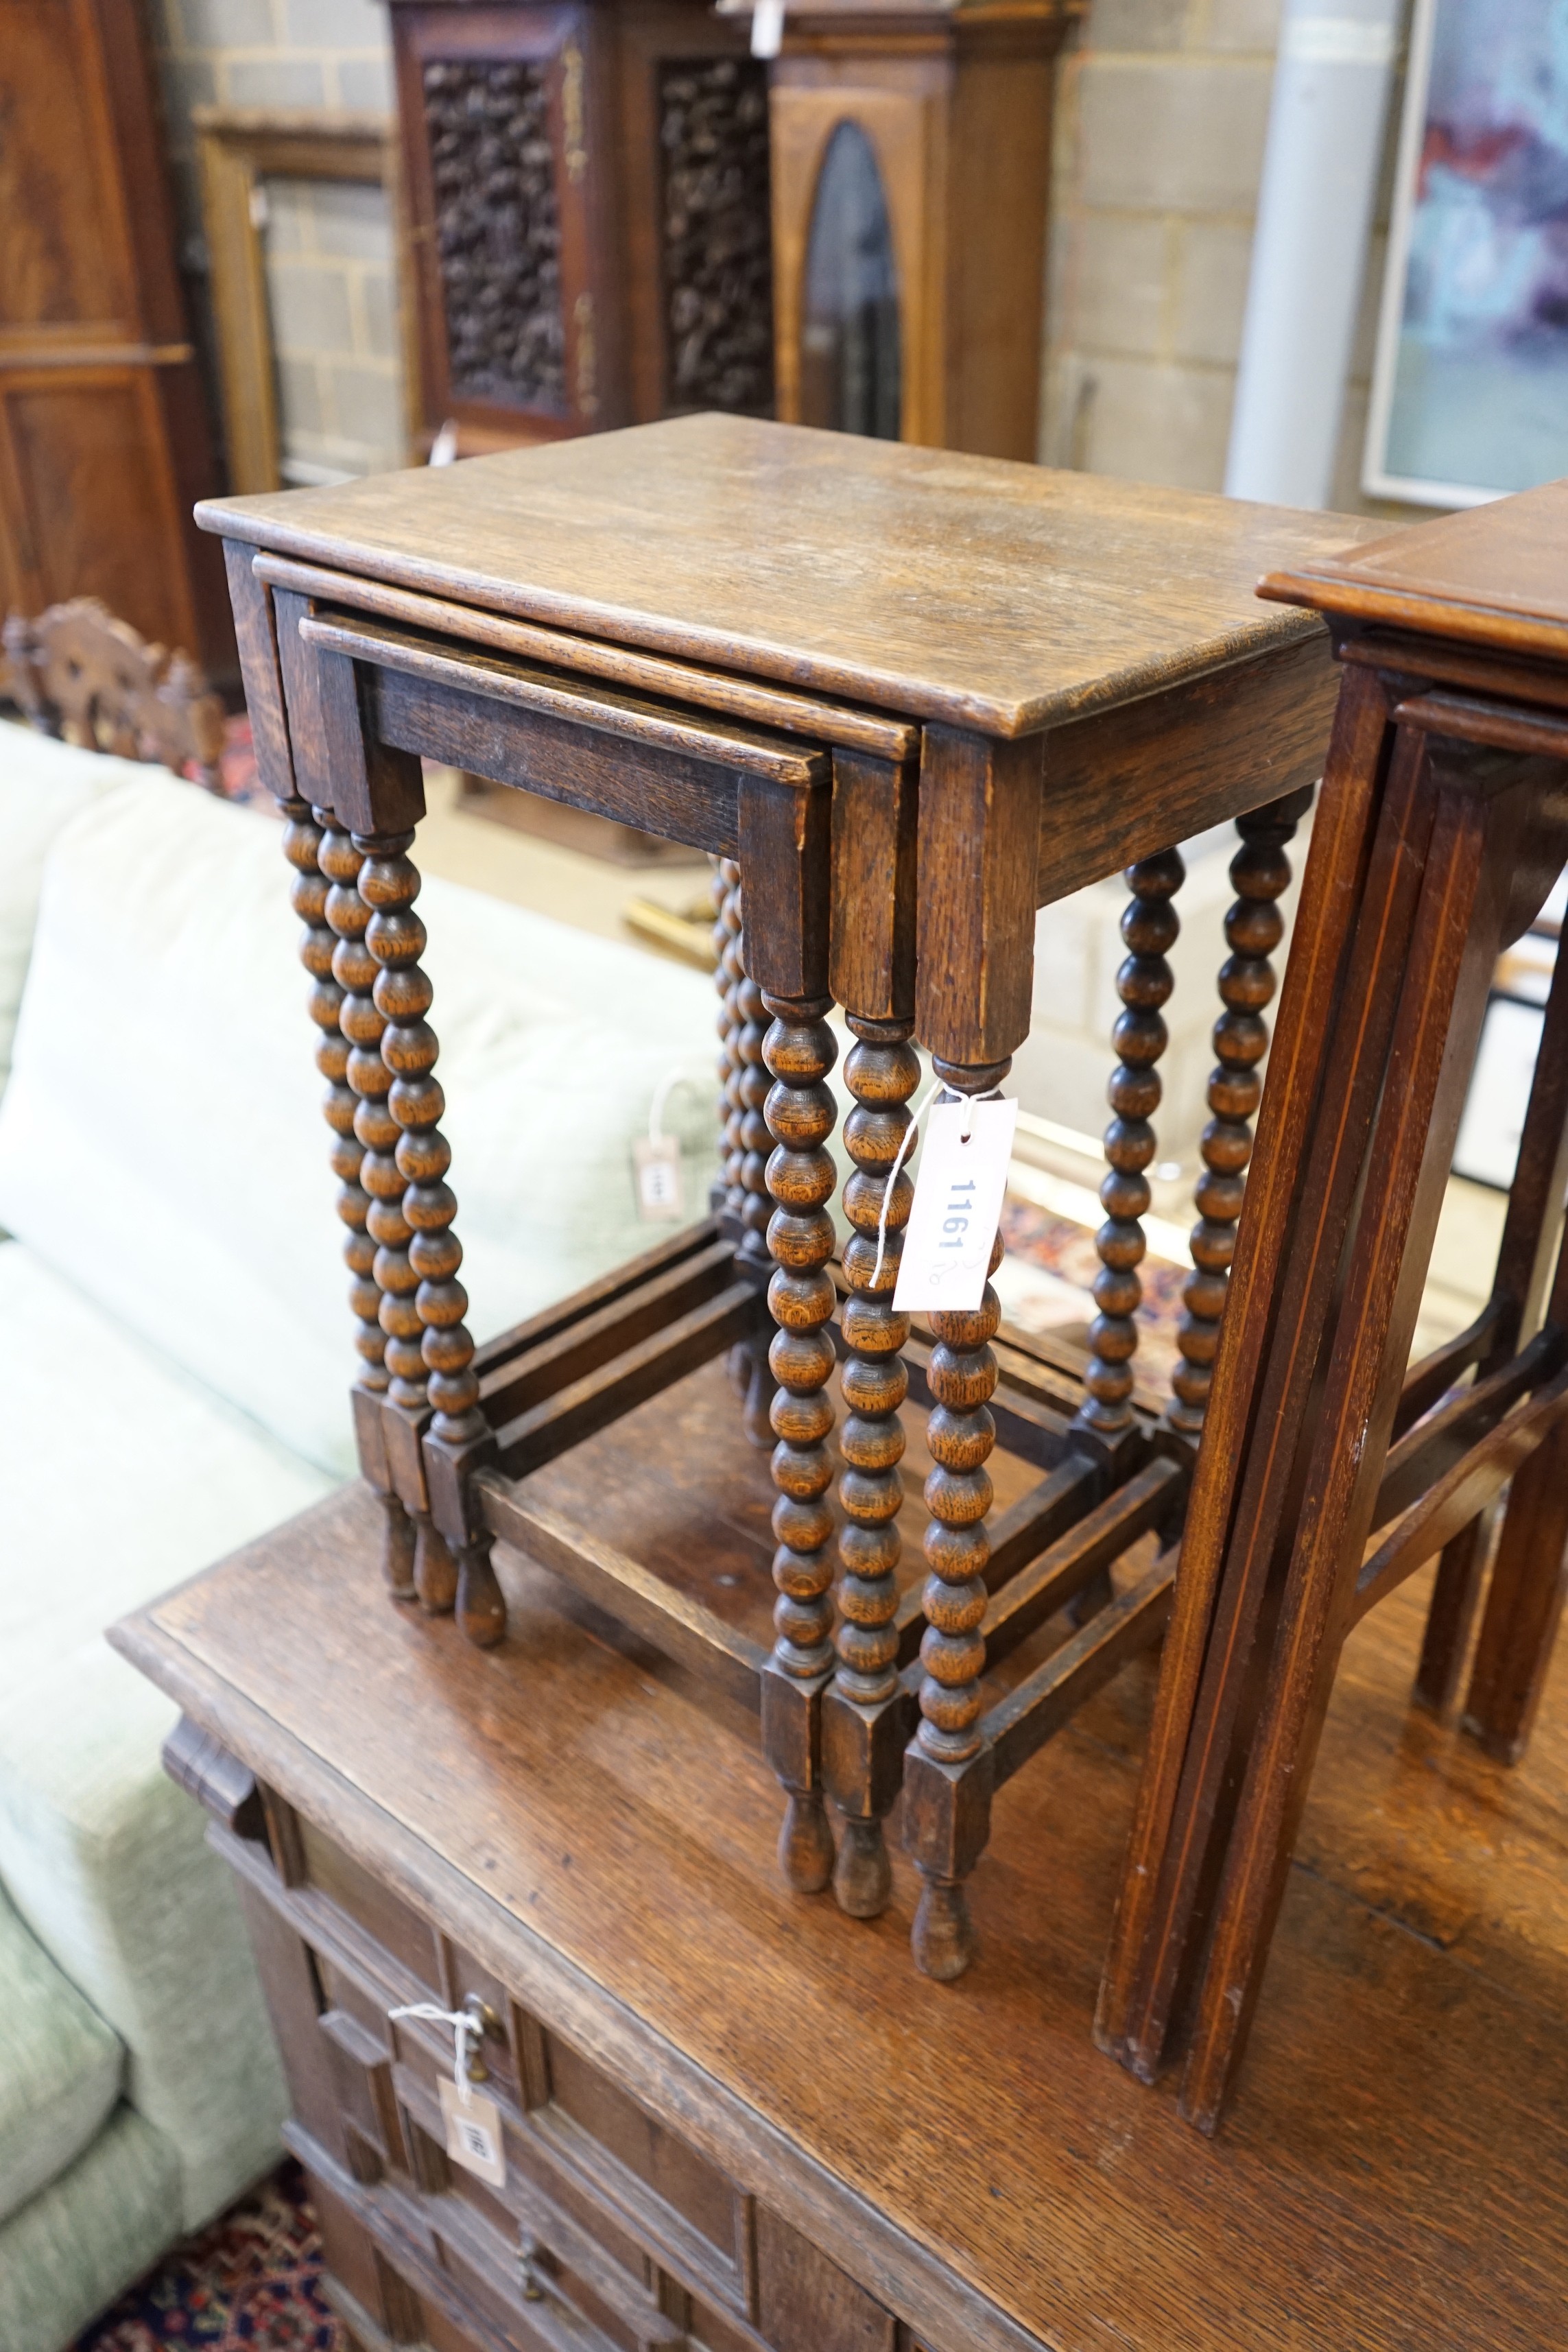 A nest of three Edwardian mahogany tea tables, height 61cm, a nest of three oak tea tables and an octagonal carved occasional table